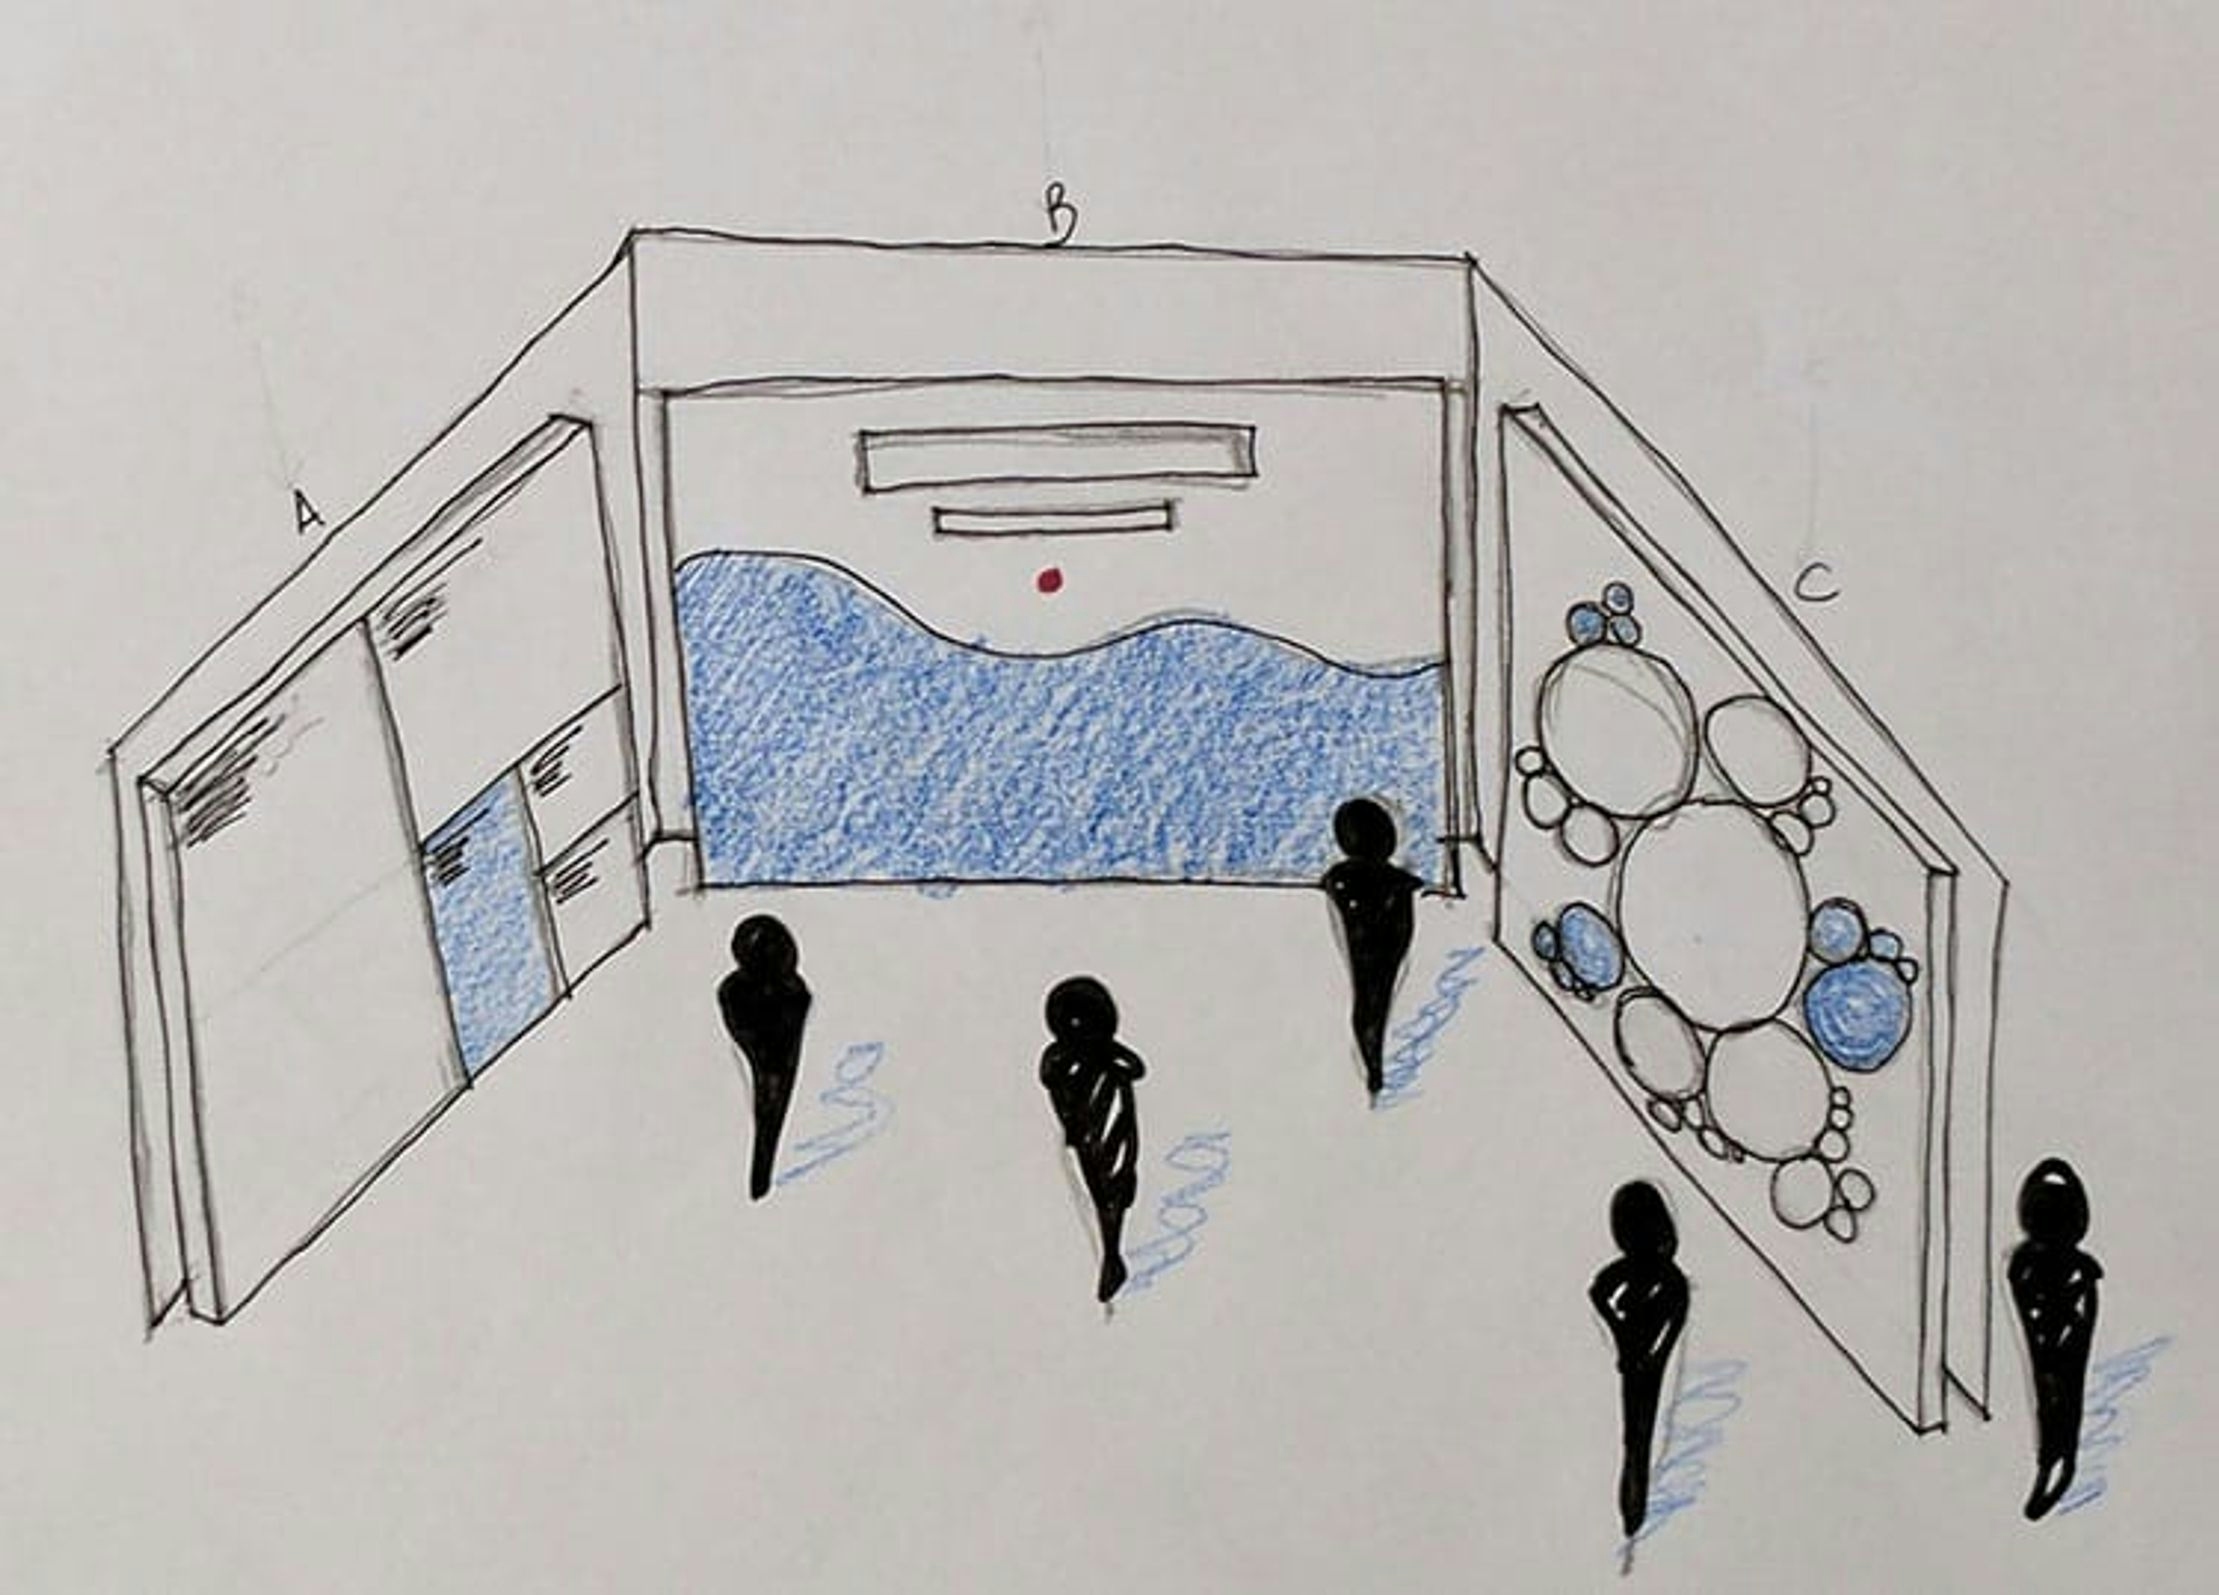 A sketch of how the Cascade presentation might be laid out in the final room. It shows three large panelled screens that almost form three walls of a room. On each screen is a visualisation and five sketched silhouettes of people are stood between them.